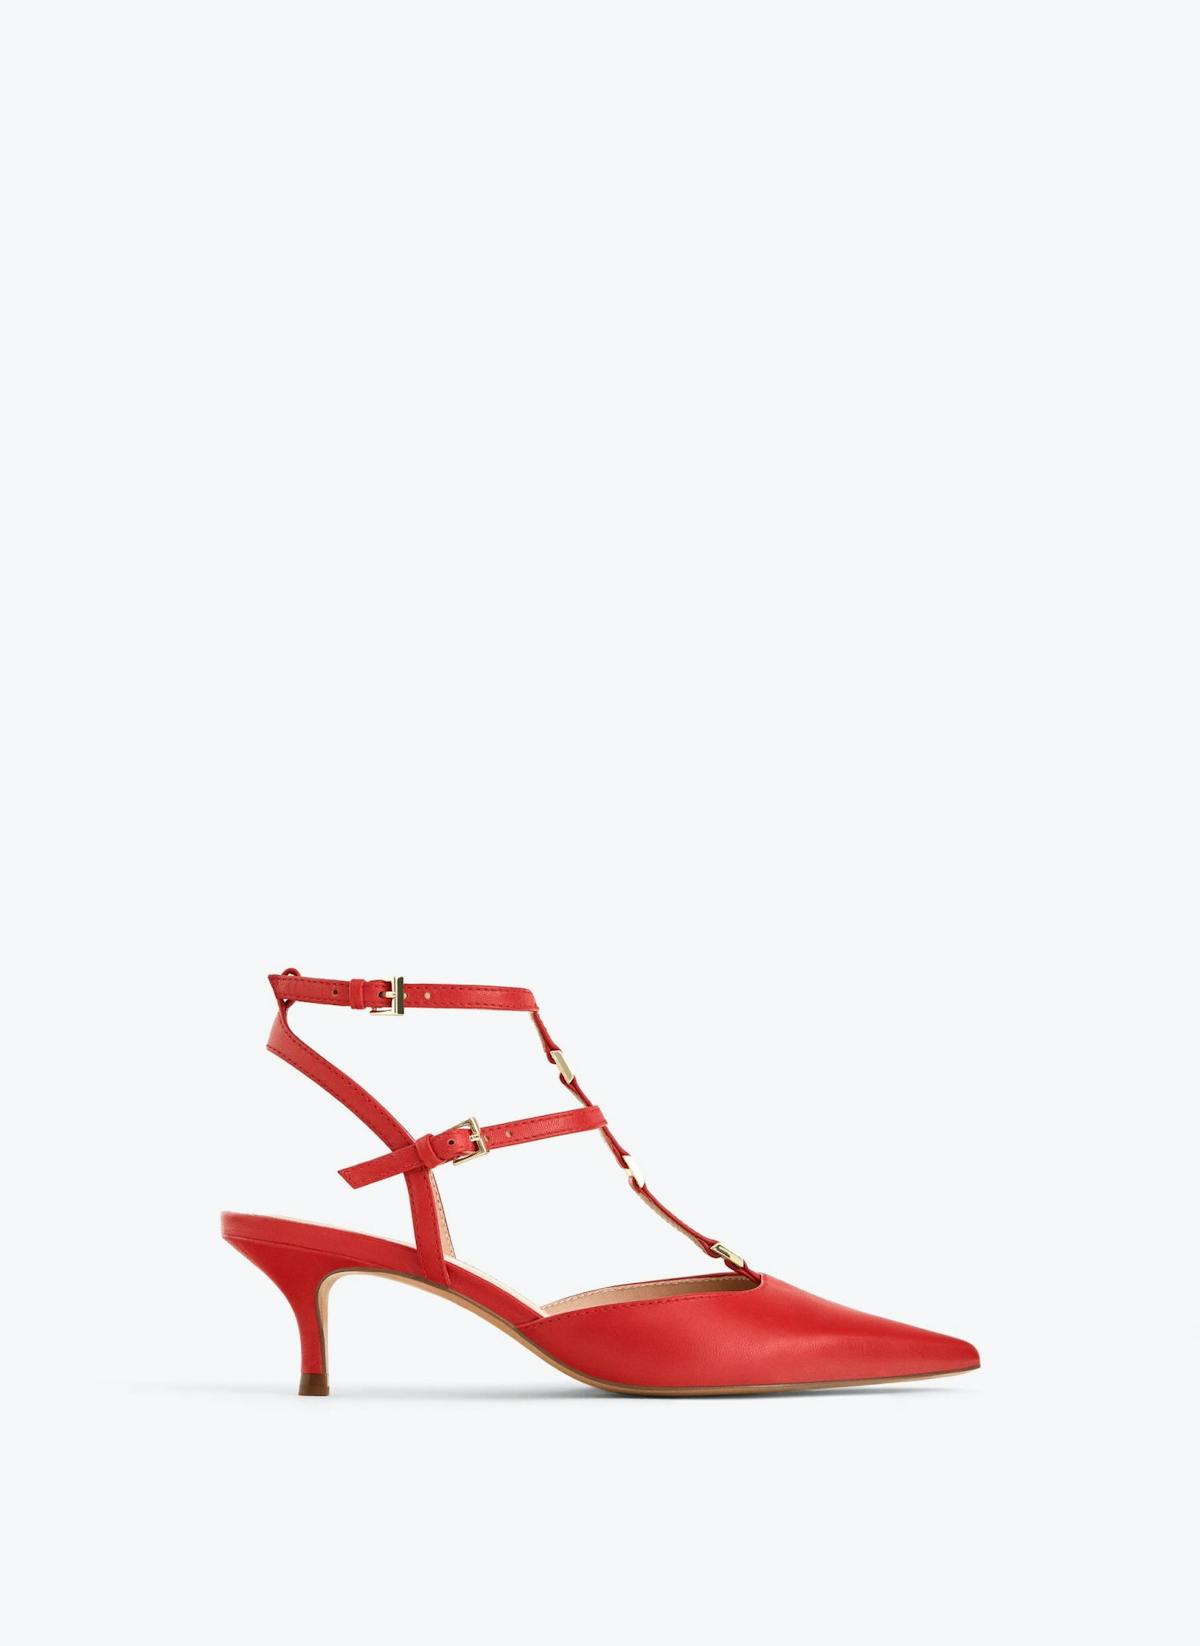 Best red shoes for party season